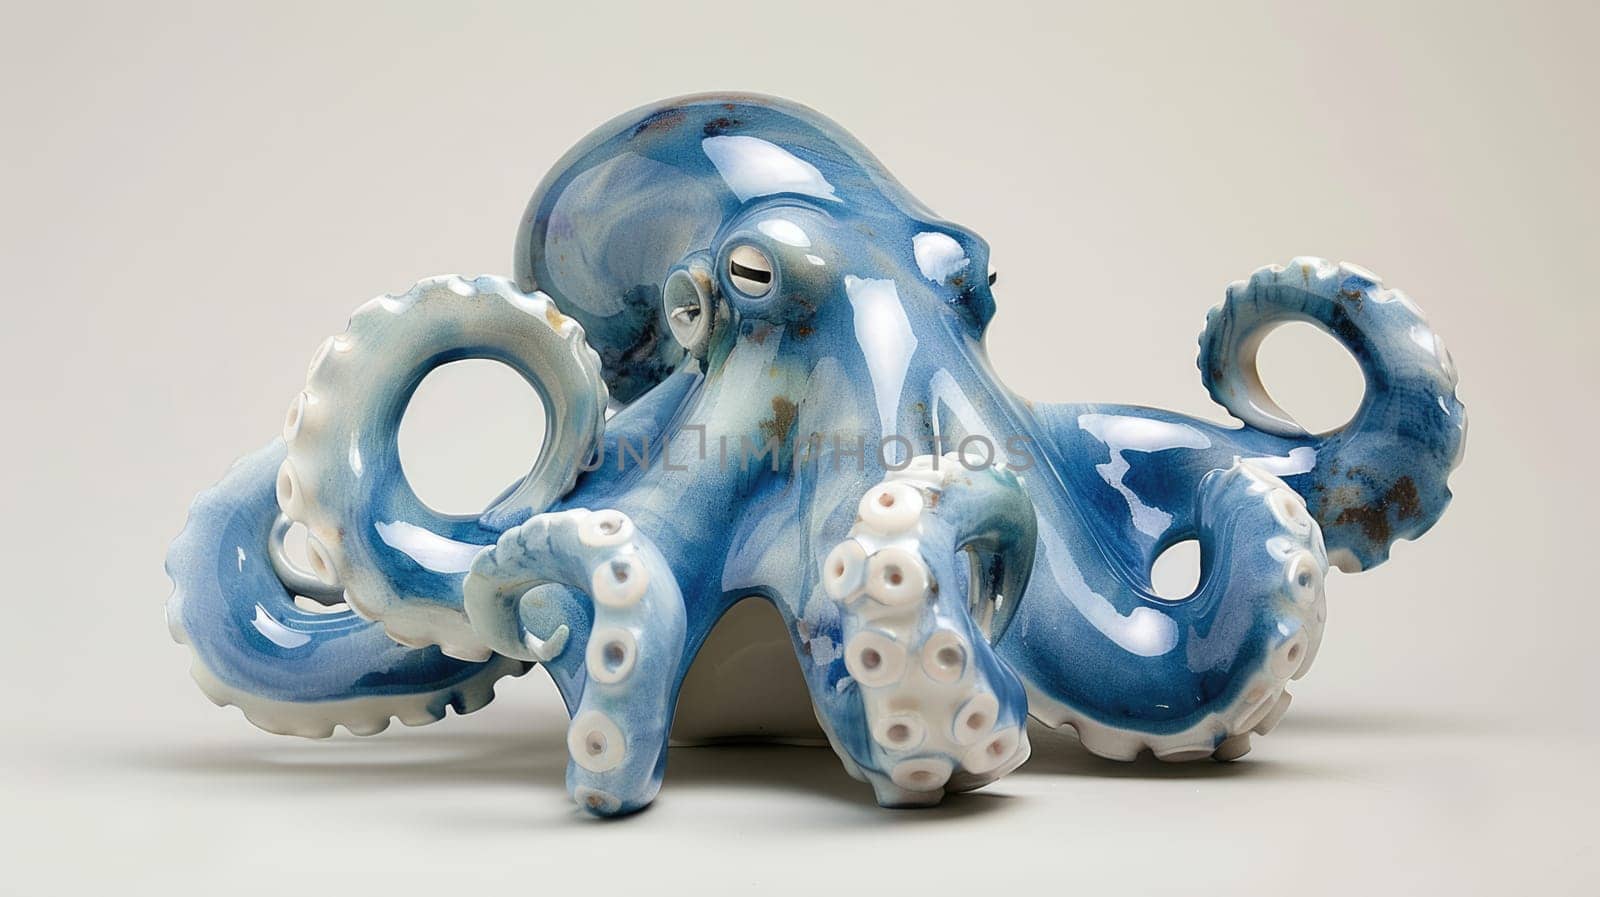 Porcelain figurine of an octopus, in blue and pearlescent tones by natali_brill